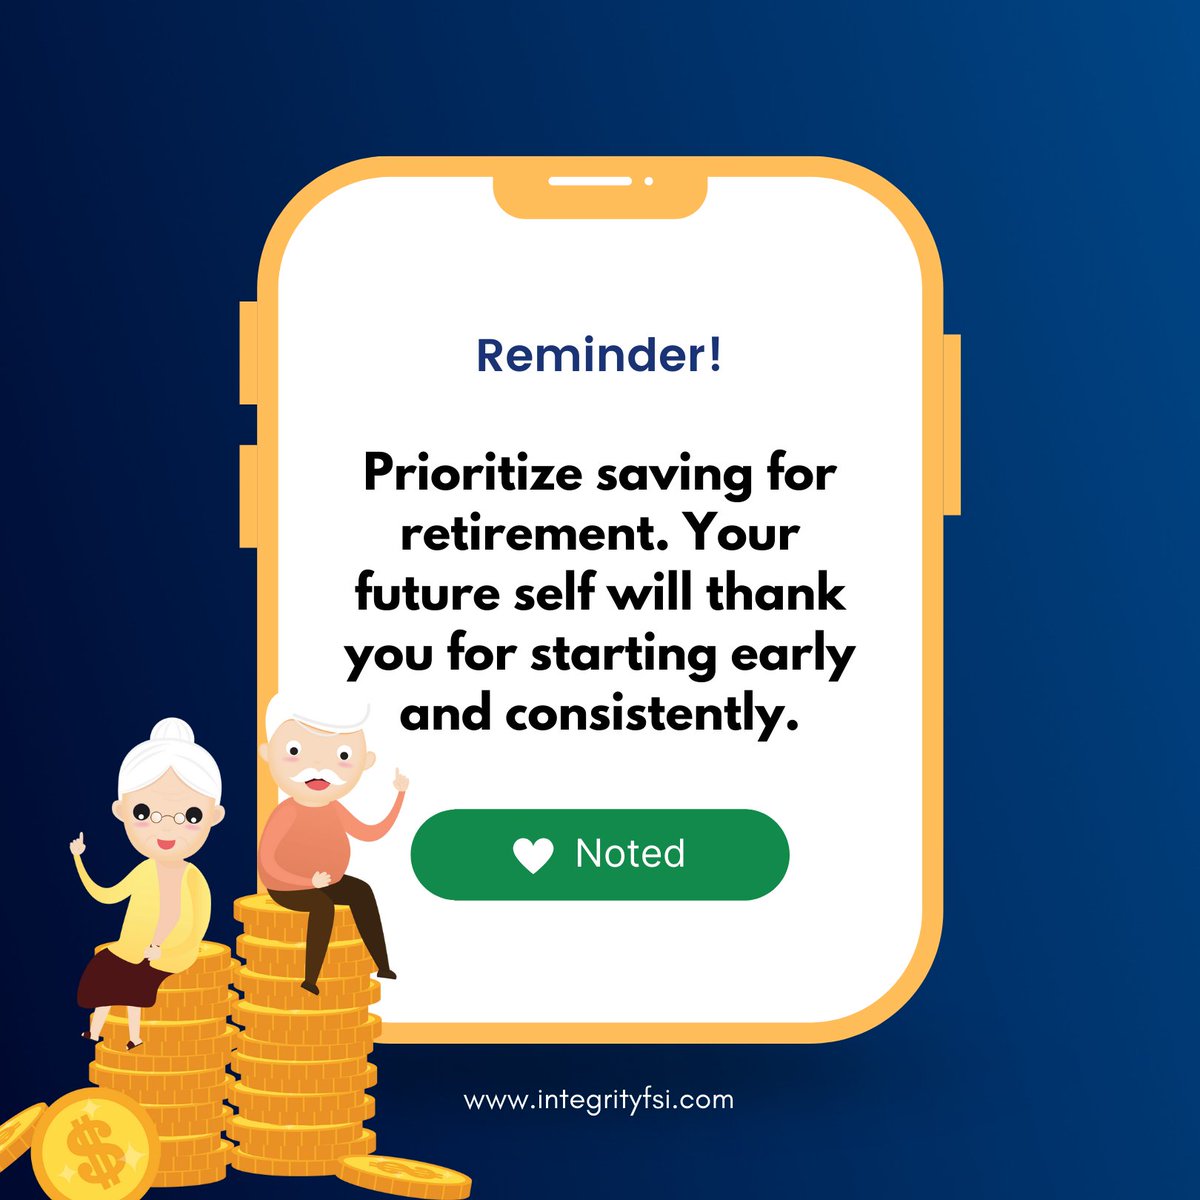 Don't delay, prioritize saving for retirement today. Your future self will thank you for the early and consistent efforts. Let's build a solid foundation for a financially secure tomorrow! 💪🔒

#RetirementSavings #StartEarly #SecureYourFuture  #FutureInvestments